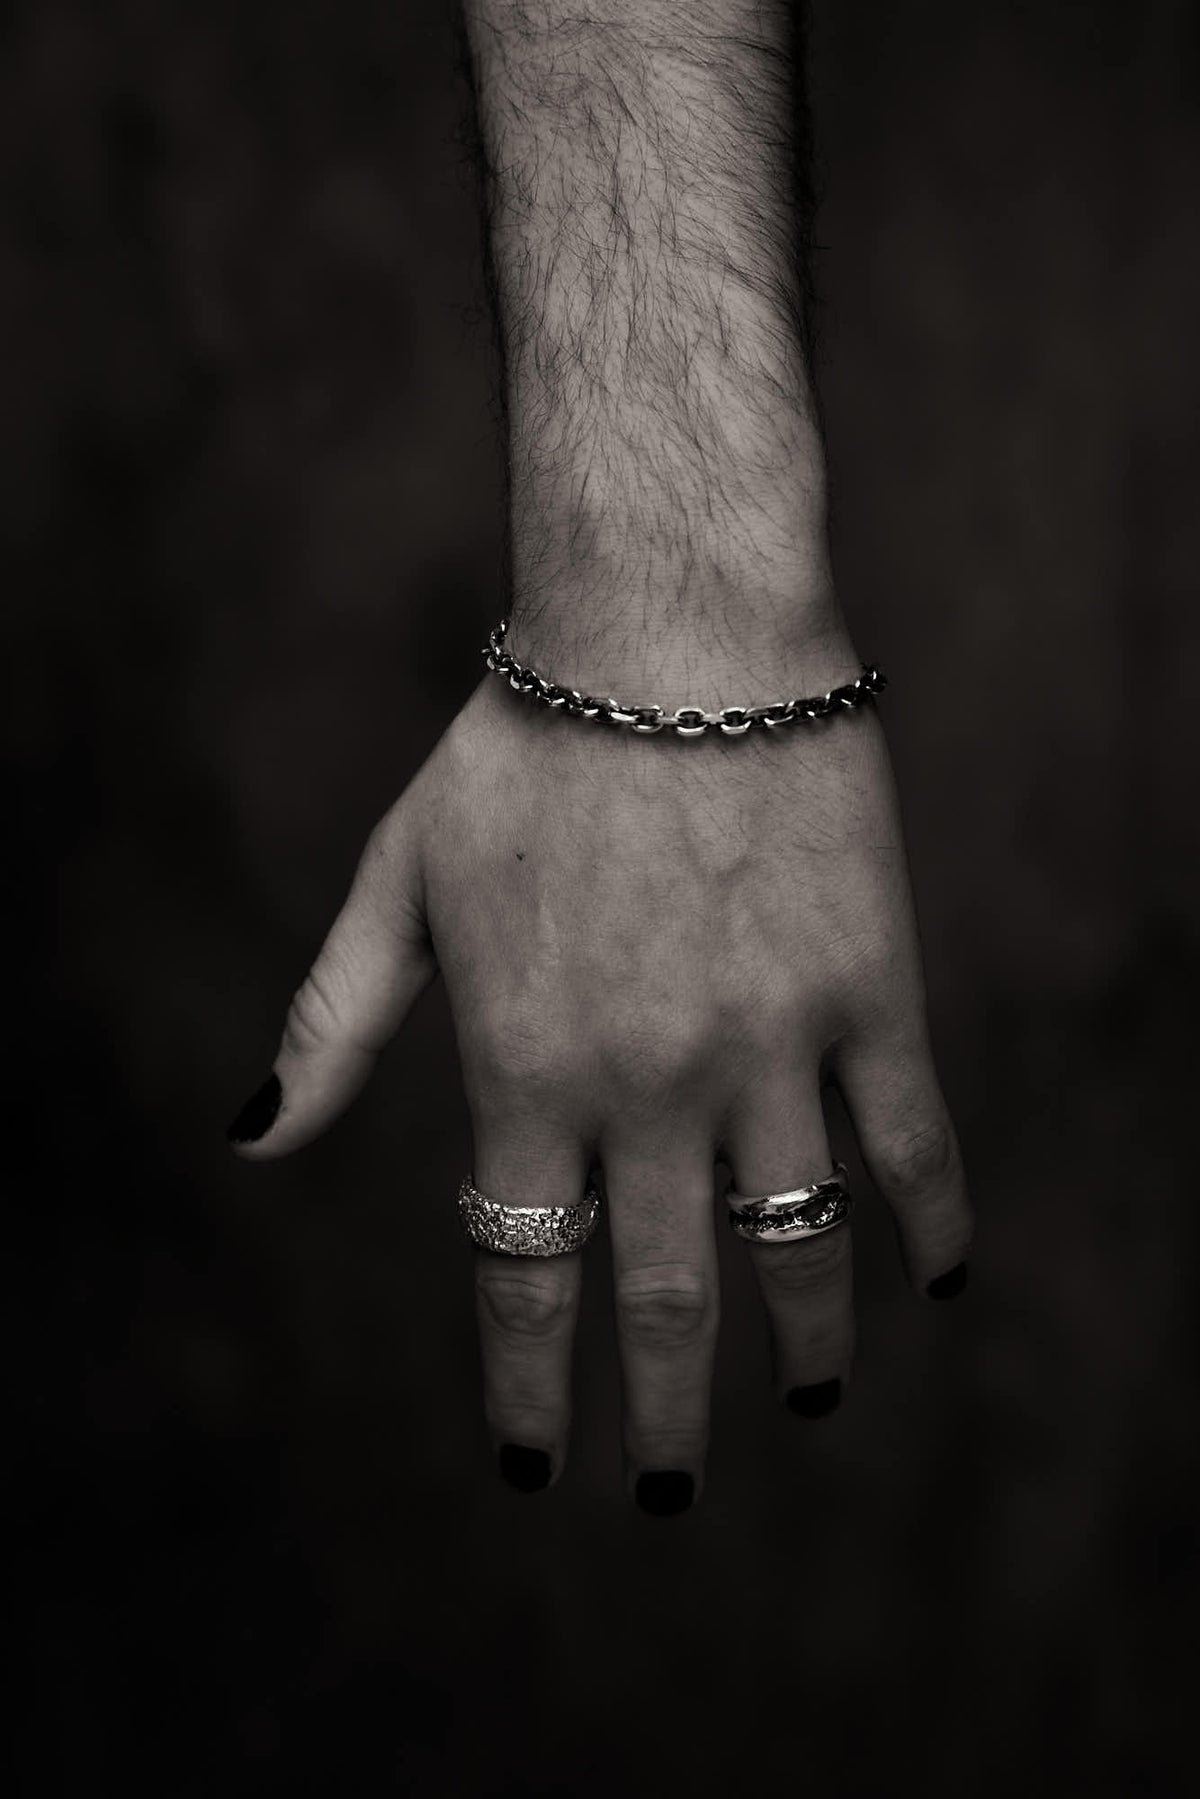 The Chain Bracelet - Boutee